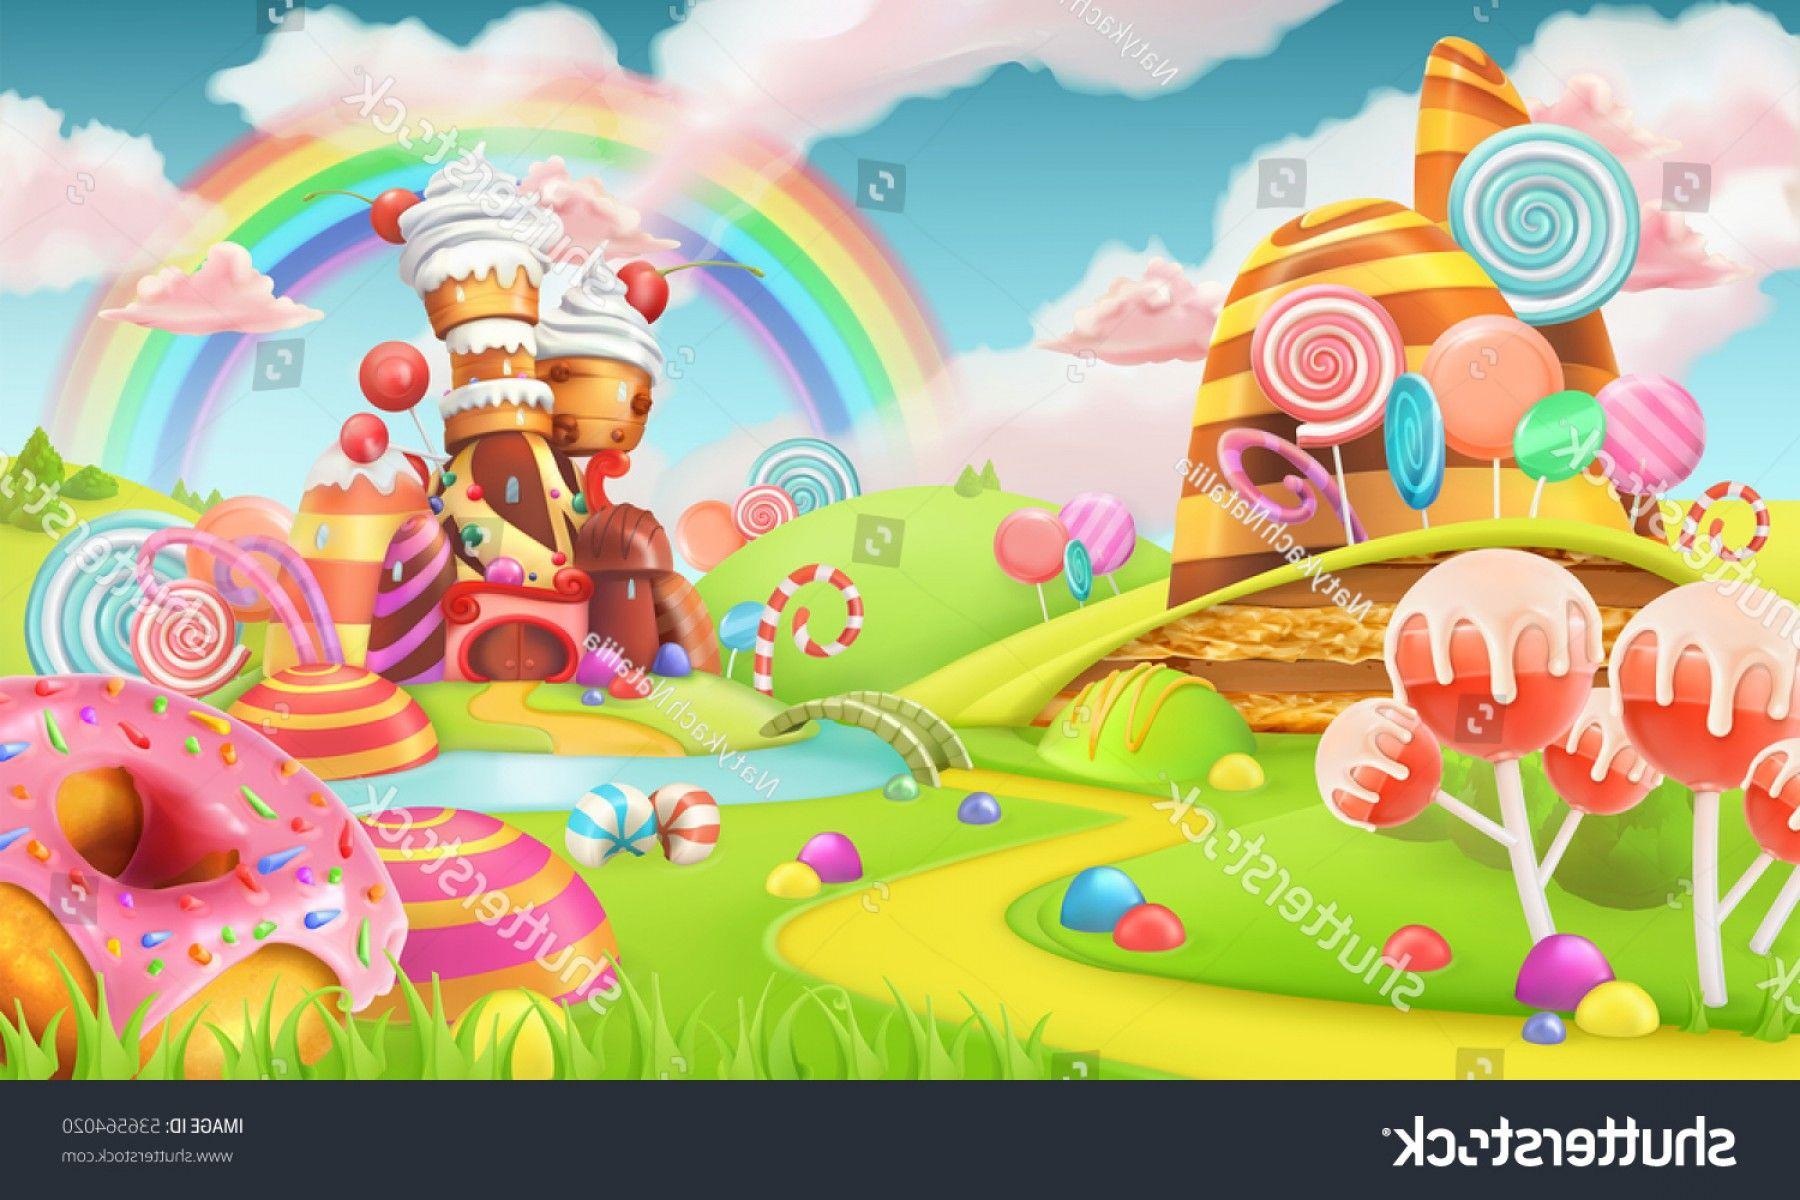 HD wallpaper Board Games Candyland Candyland Entertainment Other HD Art   Wallpaper Flare